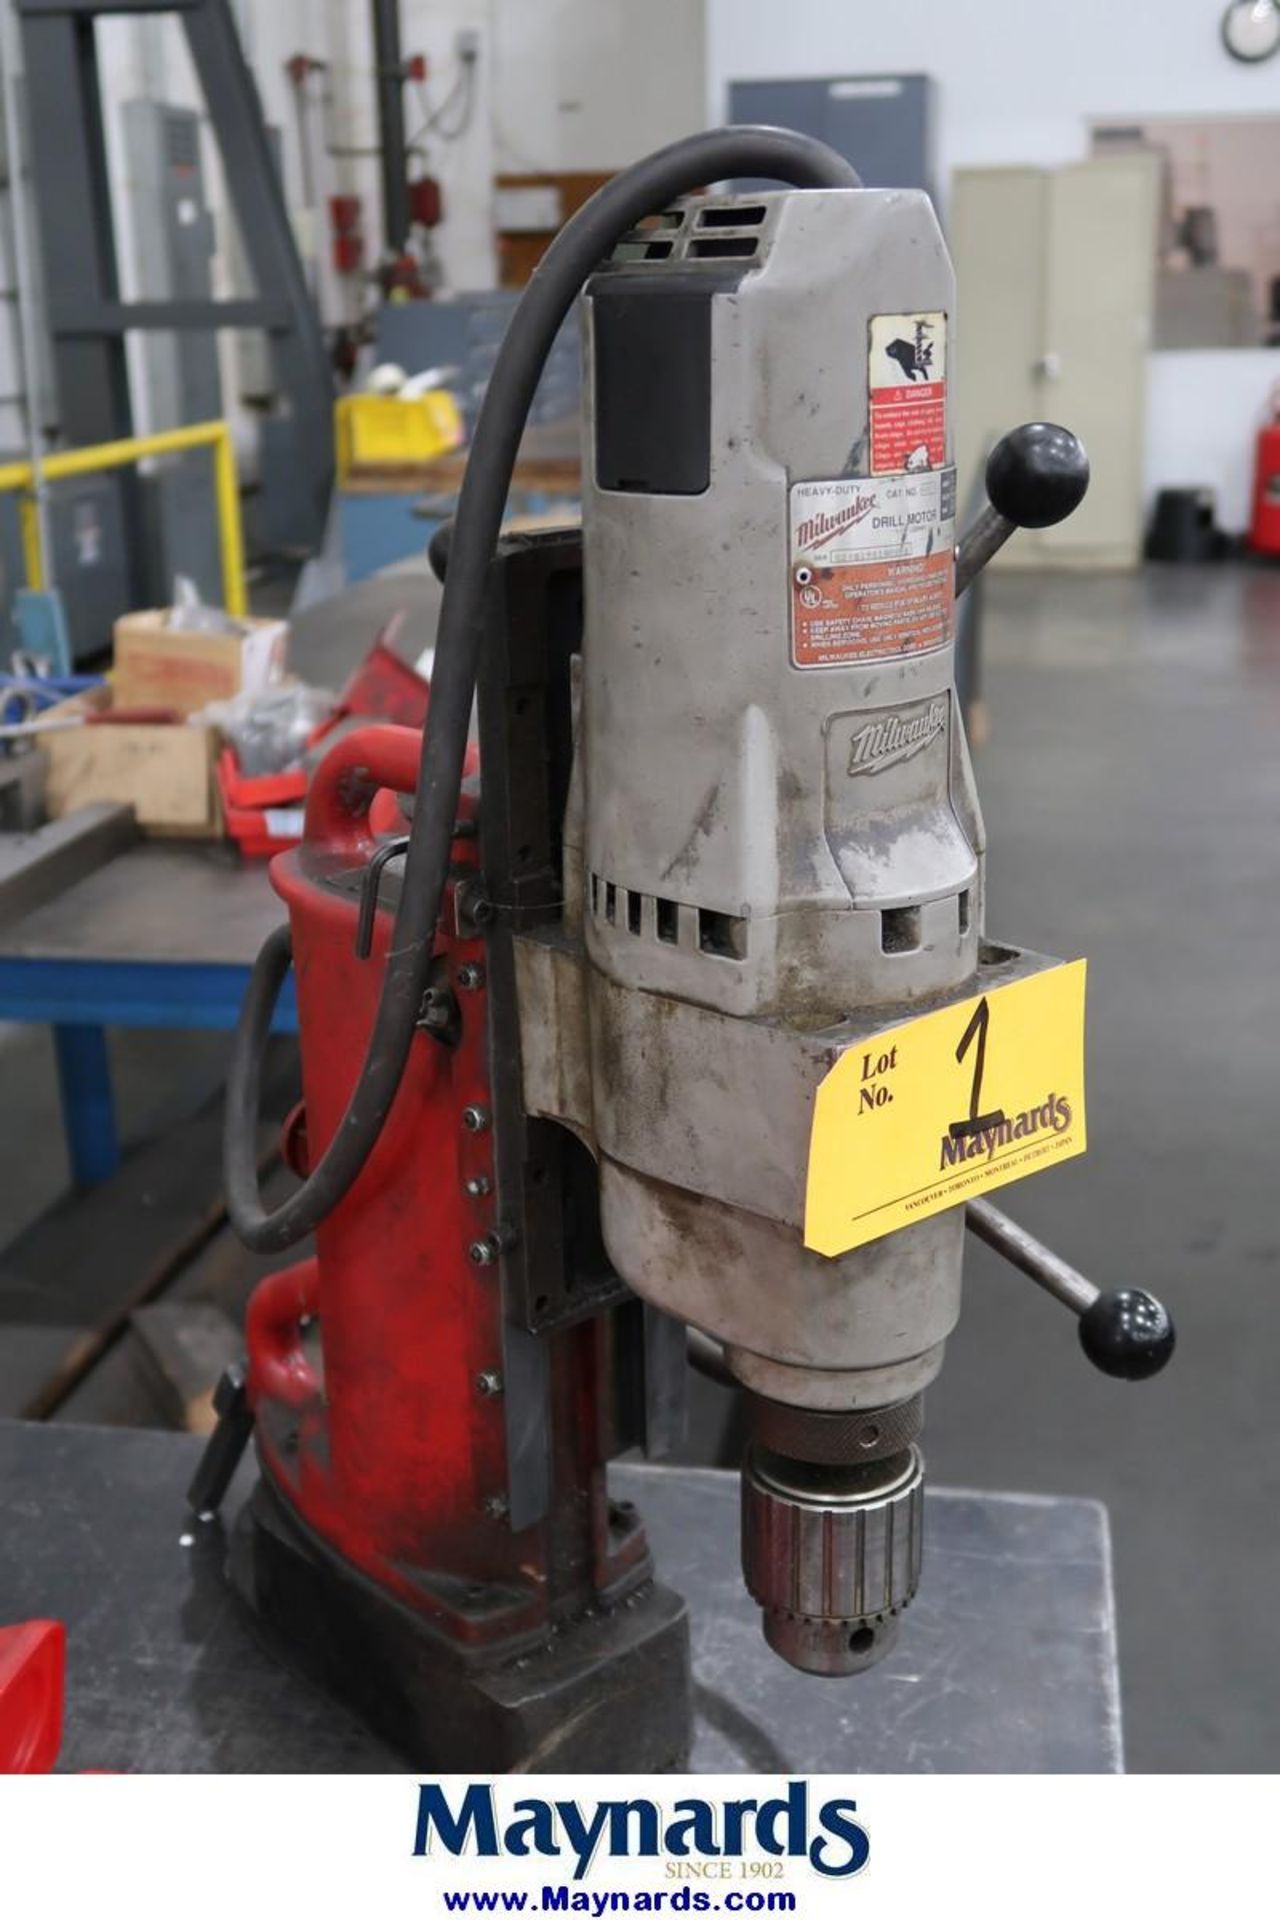 Milwaukee 42920-1 Magnetic Base Drill Press - Image 2 of 4